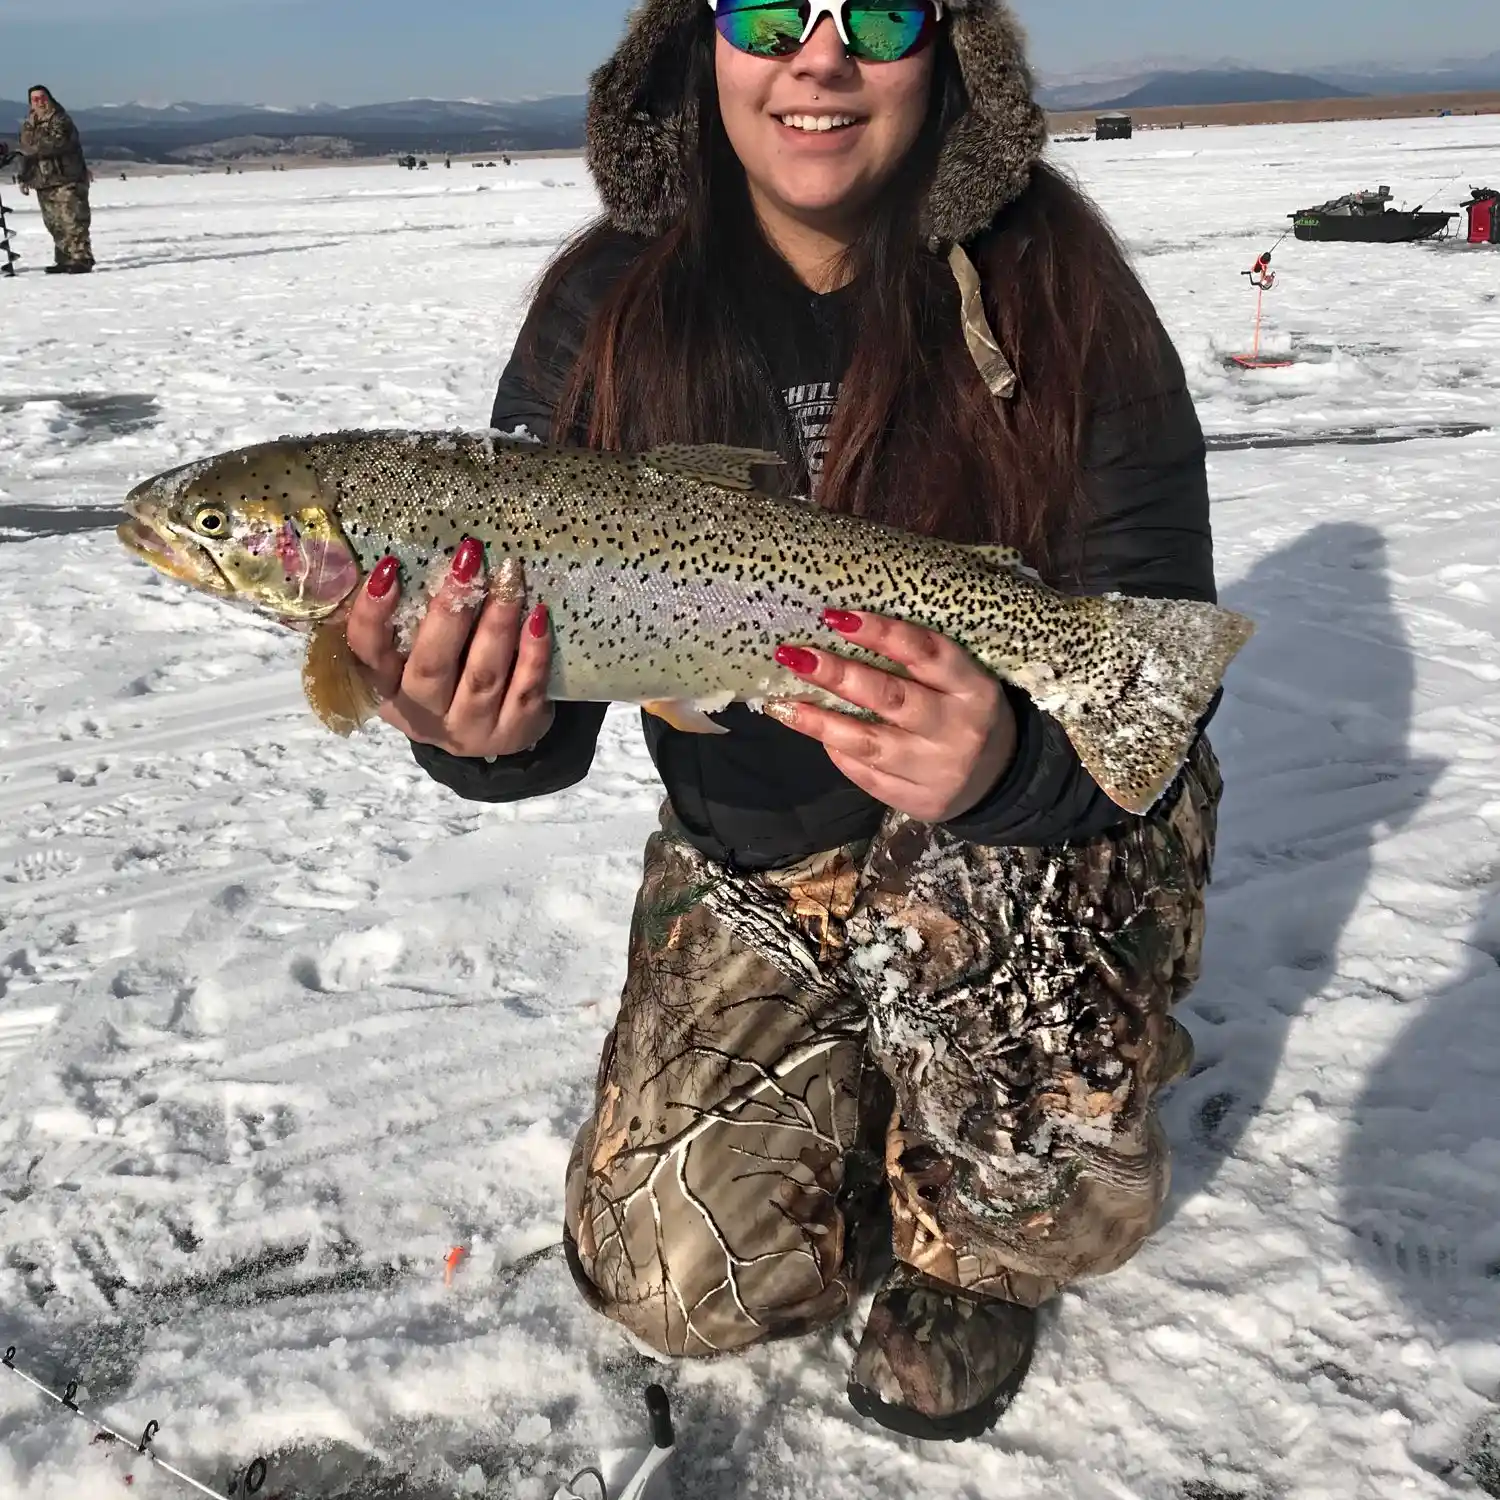 Fishing reports, best baits and forecast for fishing in Antero Reservoir